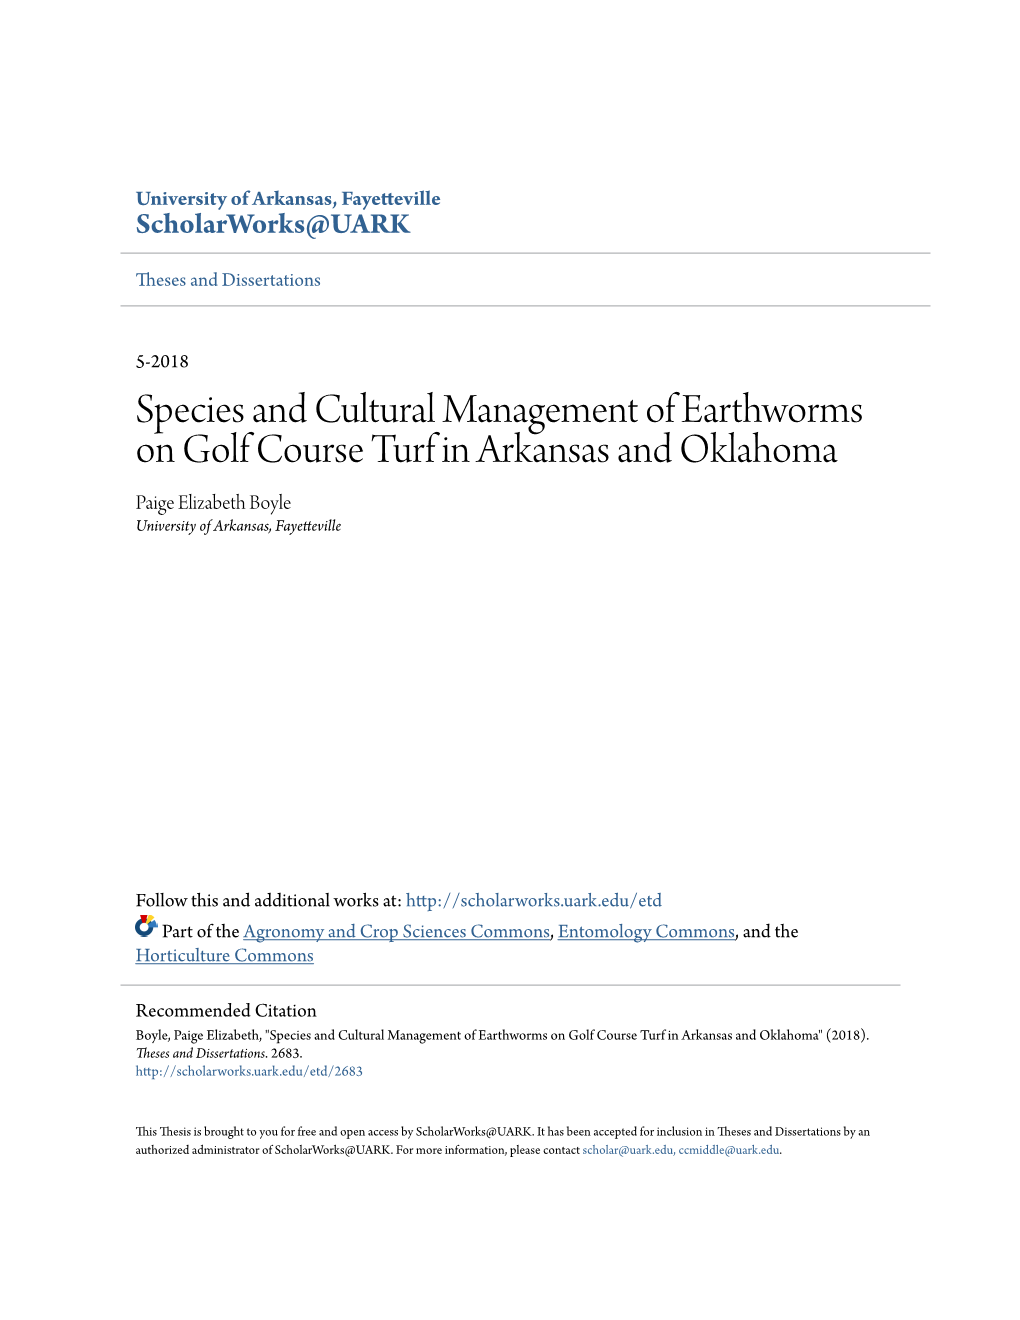 Species and Cultural Management of Earthworms on Golf Course Turf in Arkansas and Oklahoma Paige Elizabeth Boyle University of Arkansas, Fayetteville